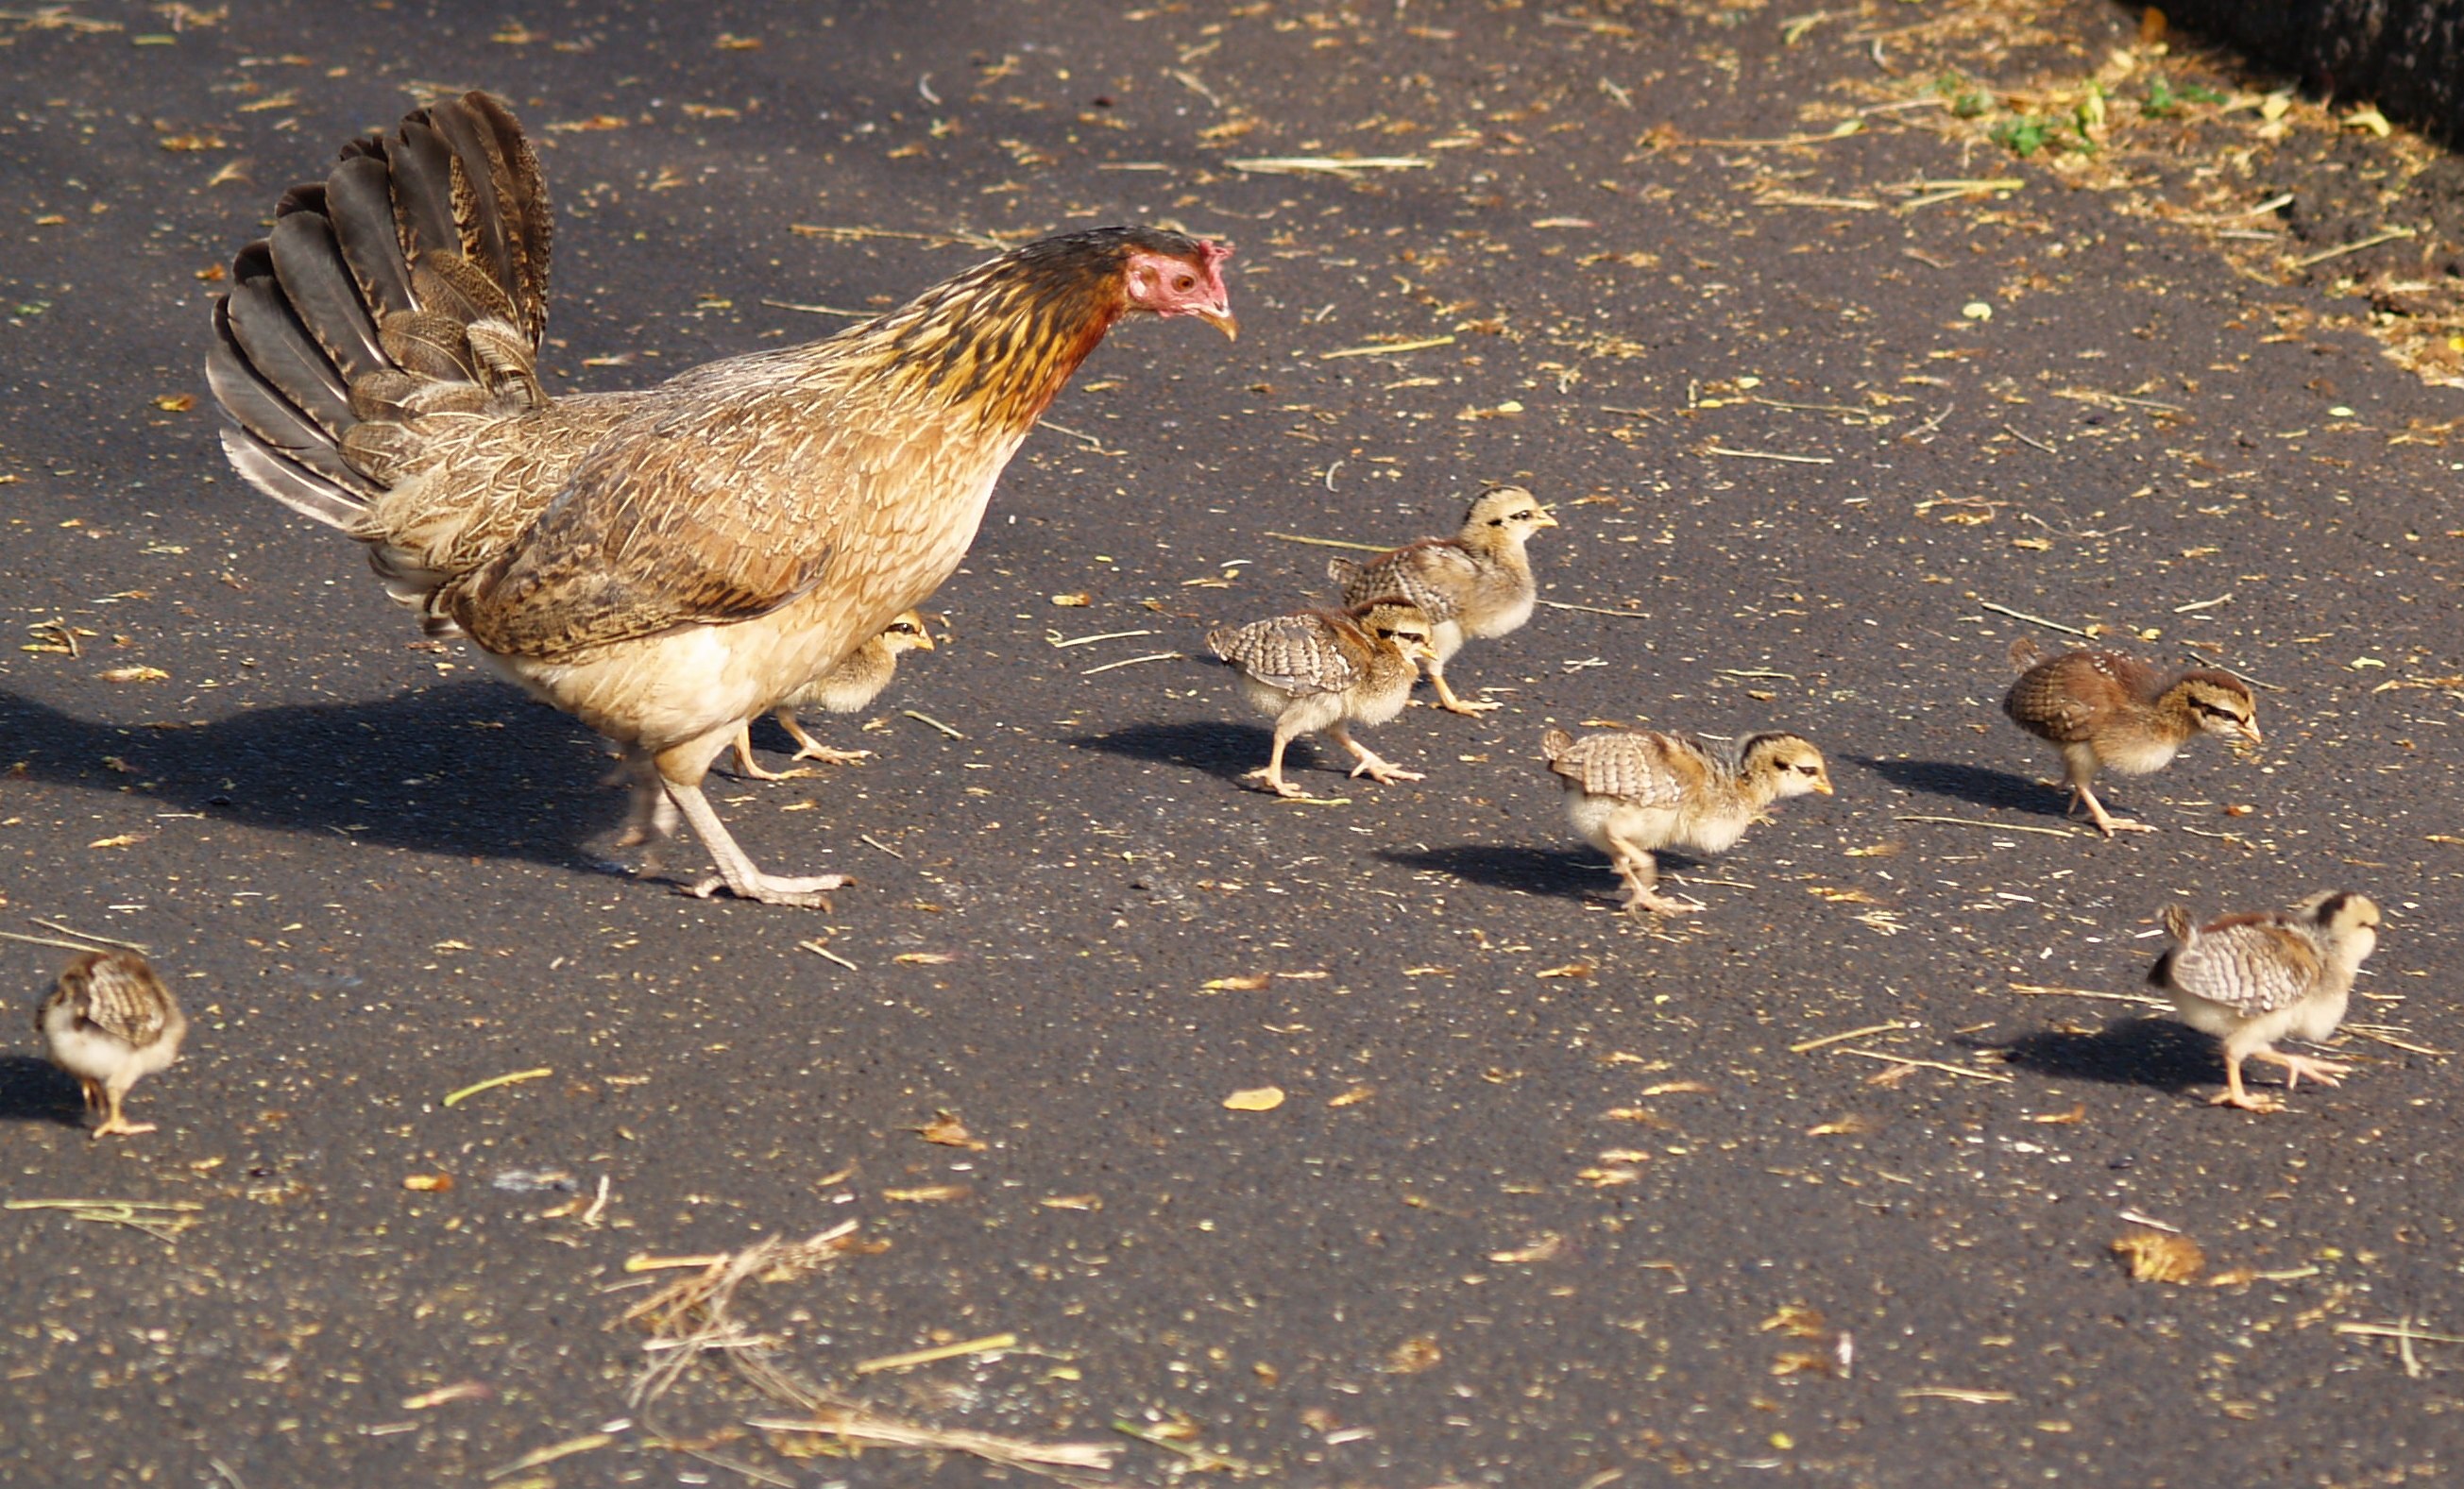 hen-and-chicks-in-lihue1.jpg